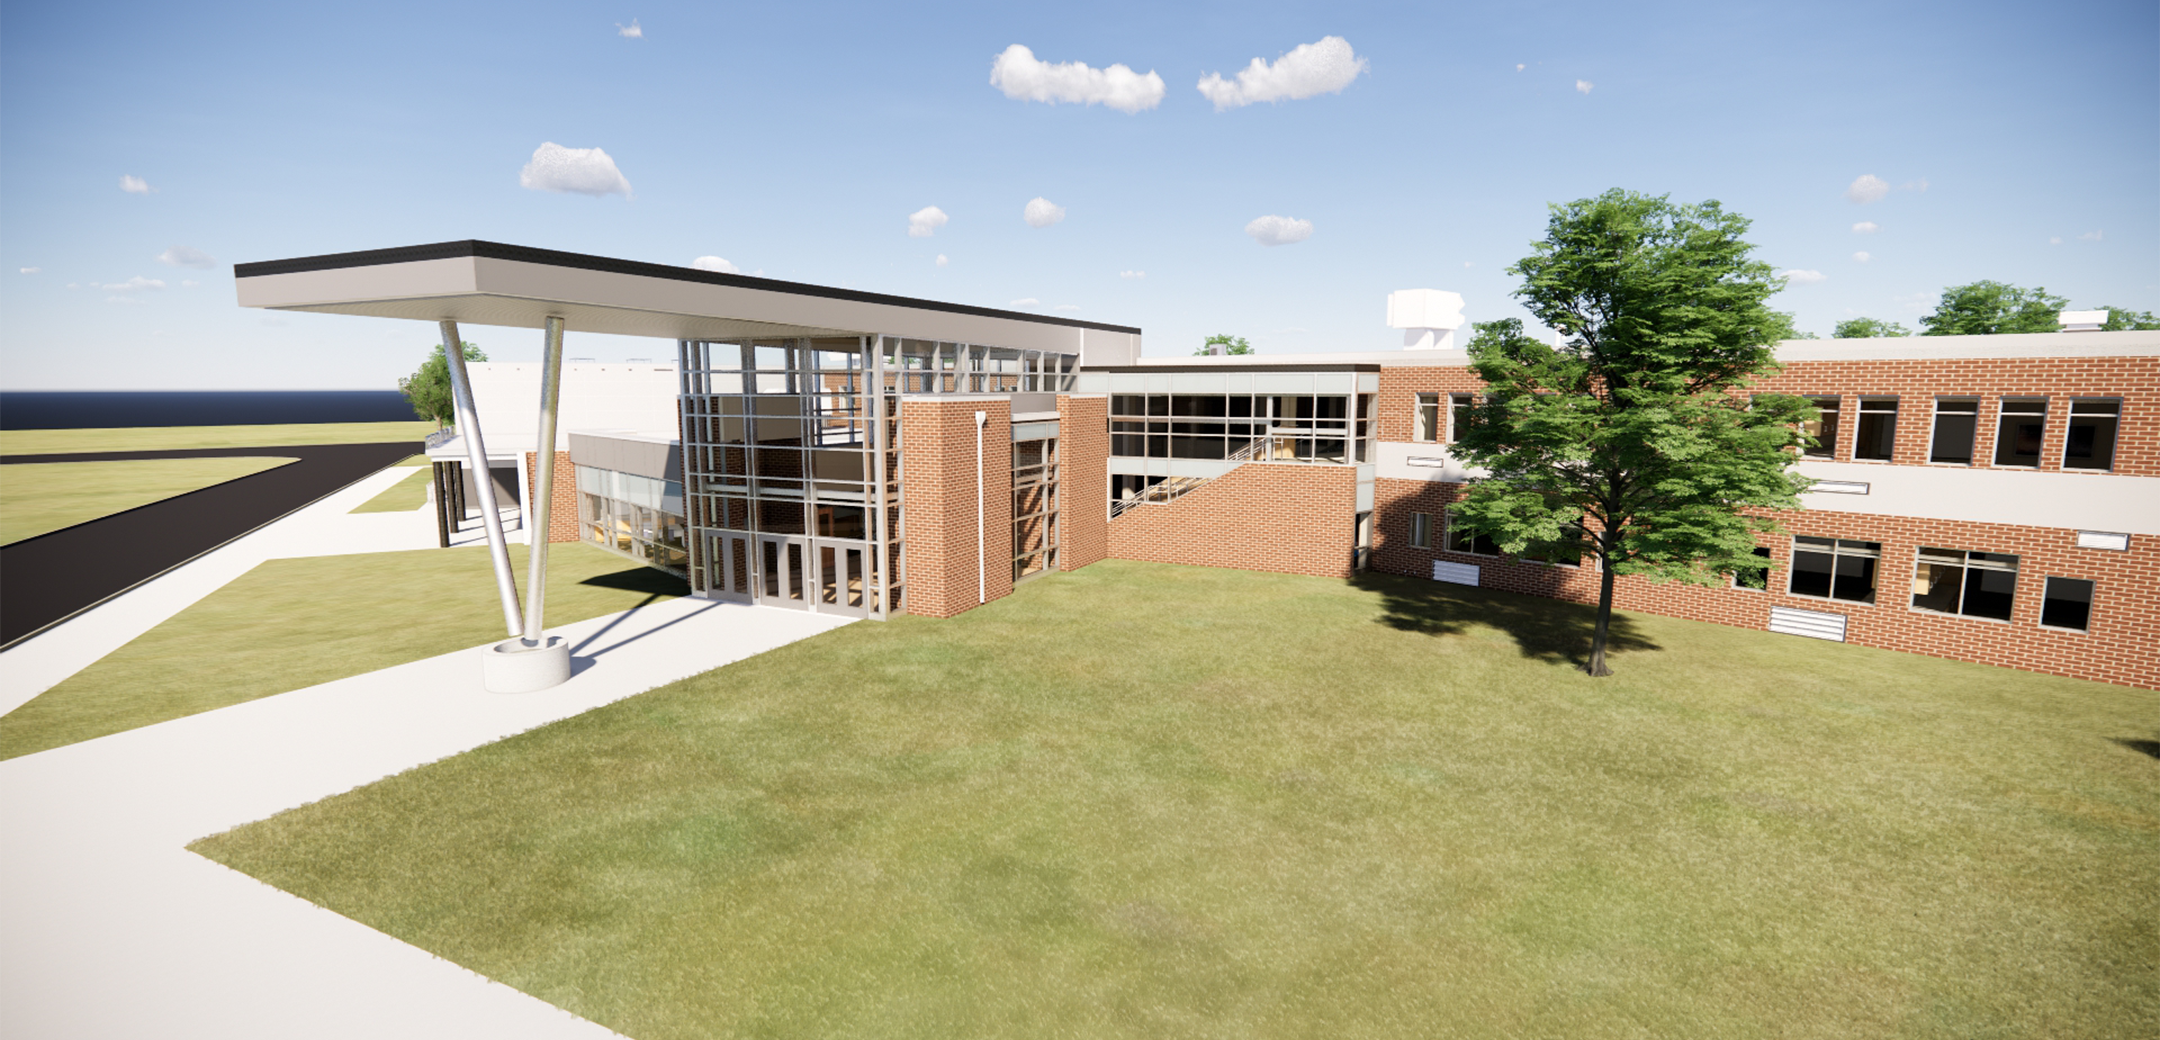 A rendering of the Ben Franklin Middle School main entrance and front lawn showcasing the overhang design and it's supporting pillars.